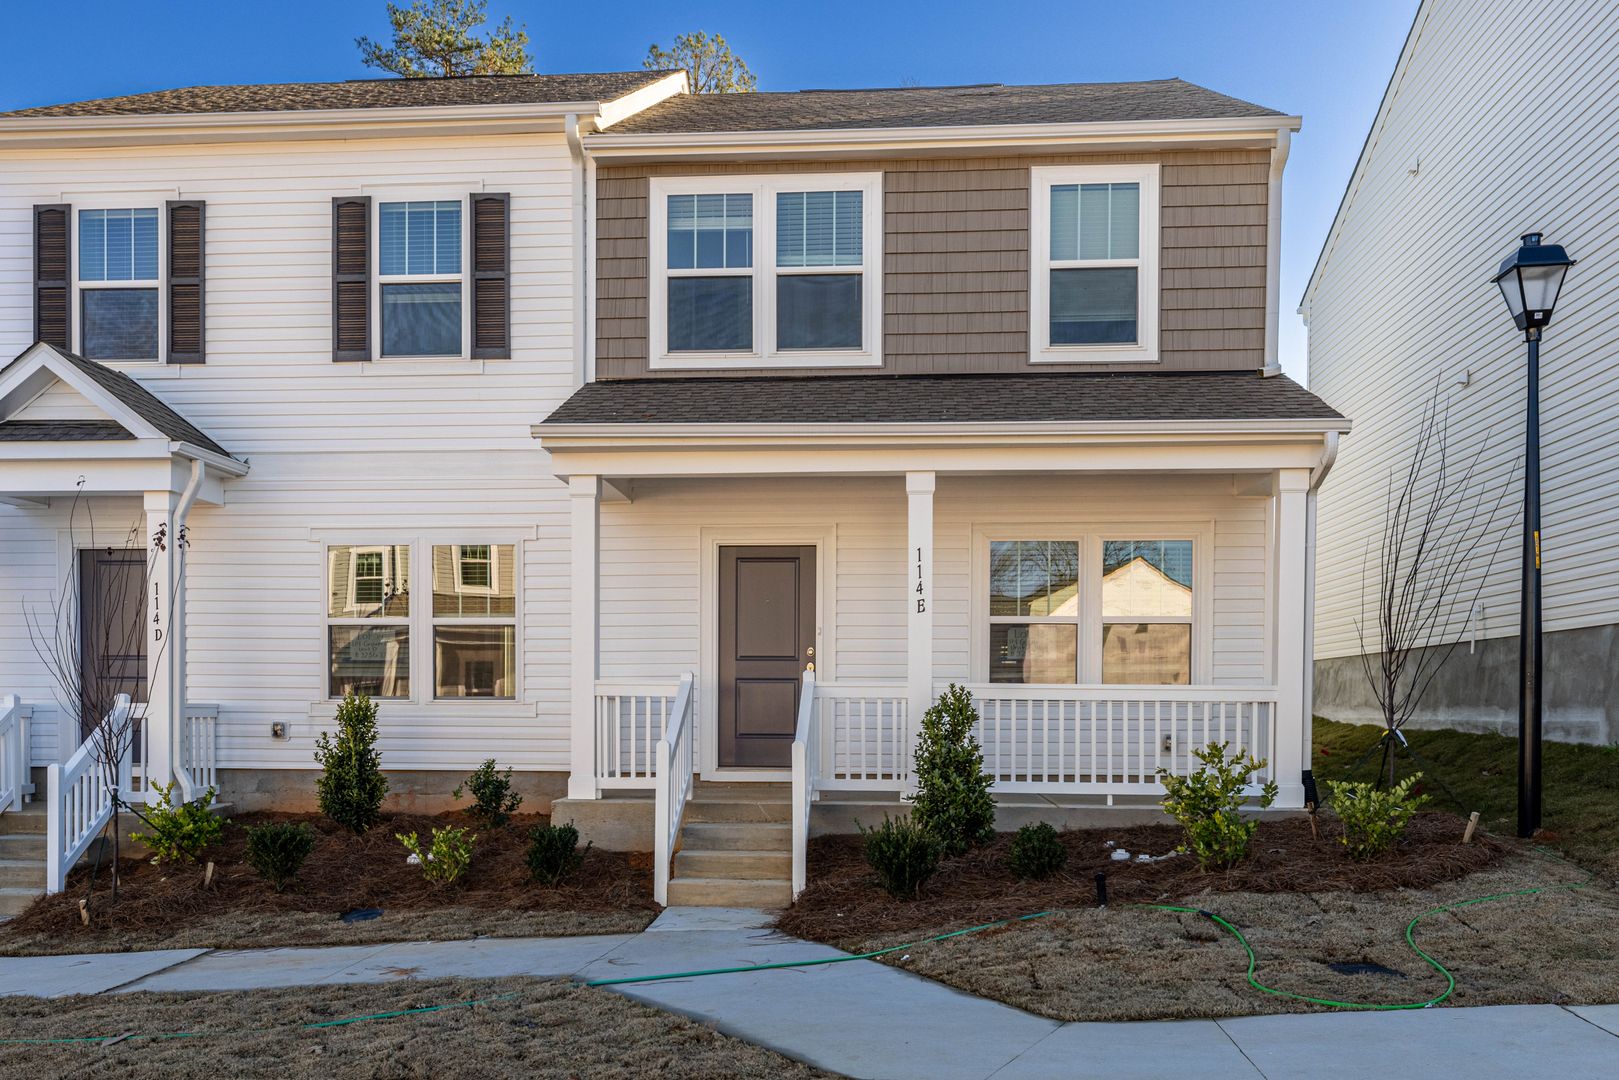 3 bd 2.5 ba Townhome in the Pine Forest community off of Main Street Mooresville